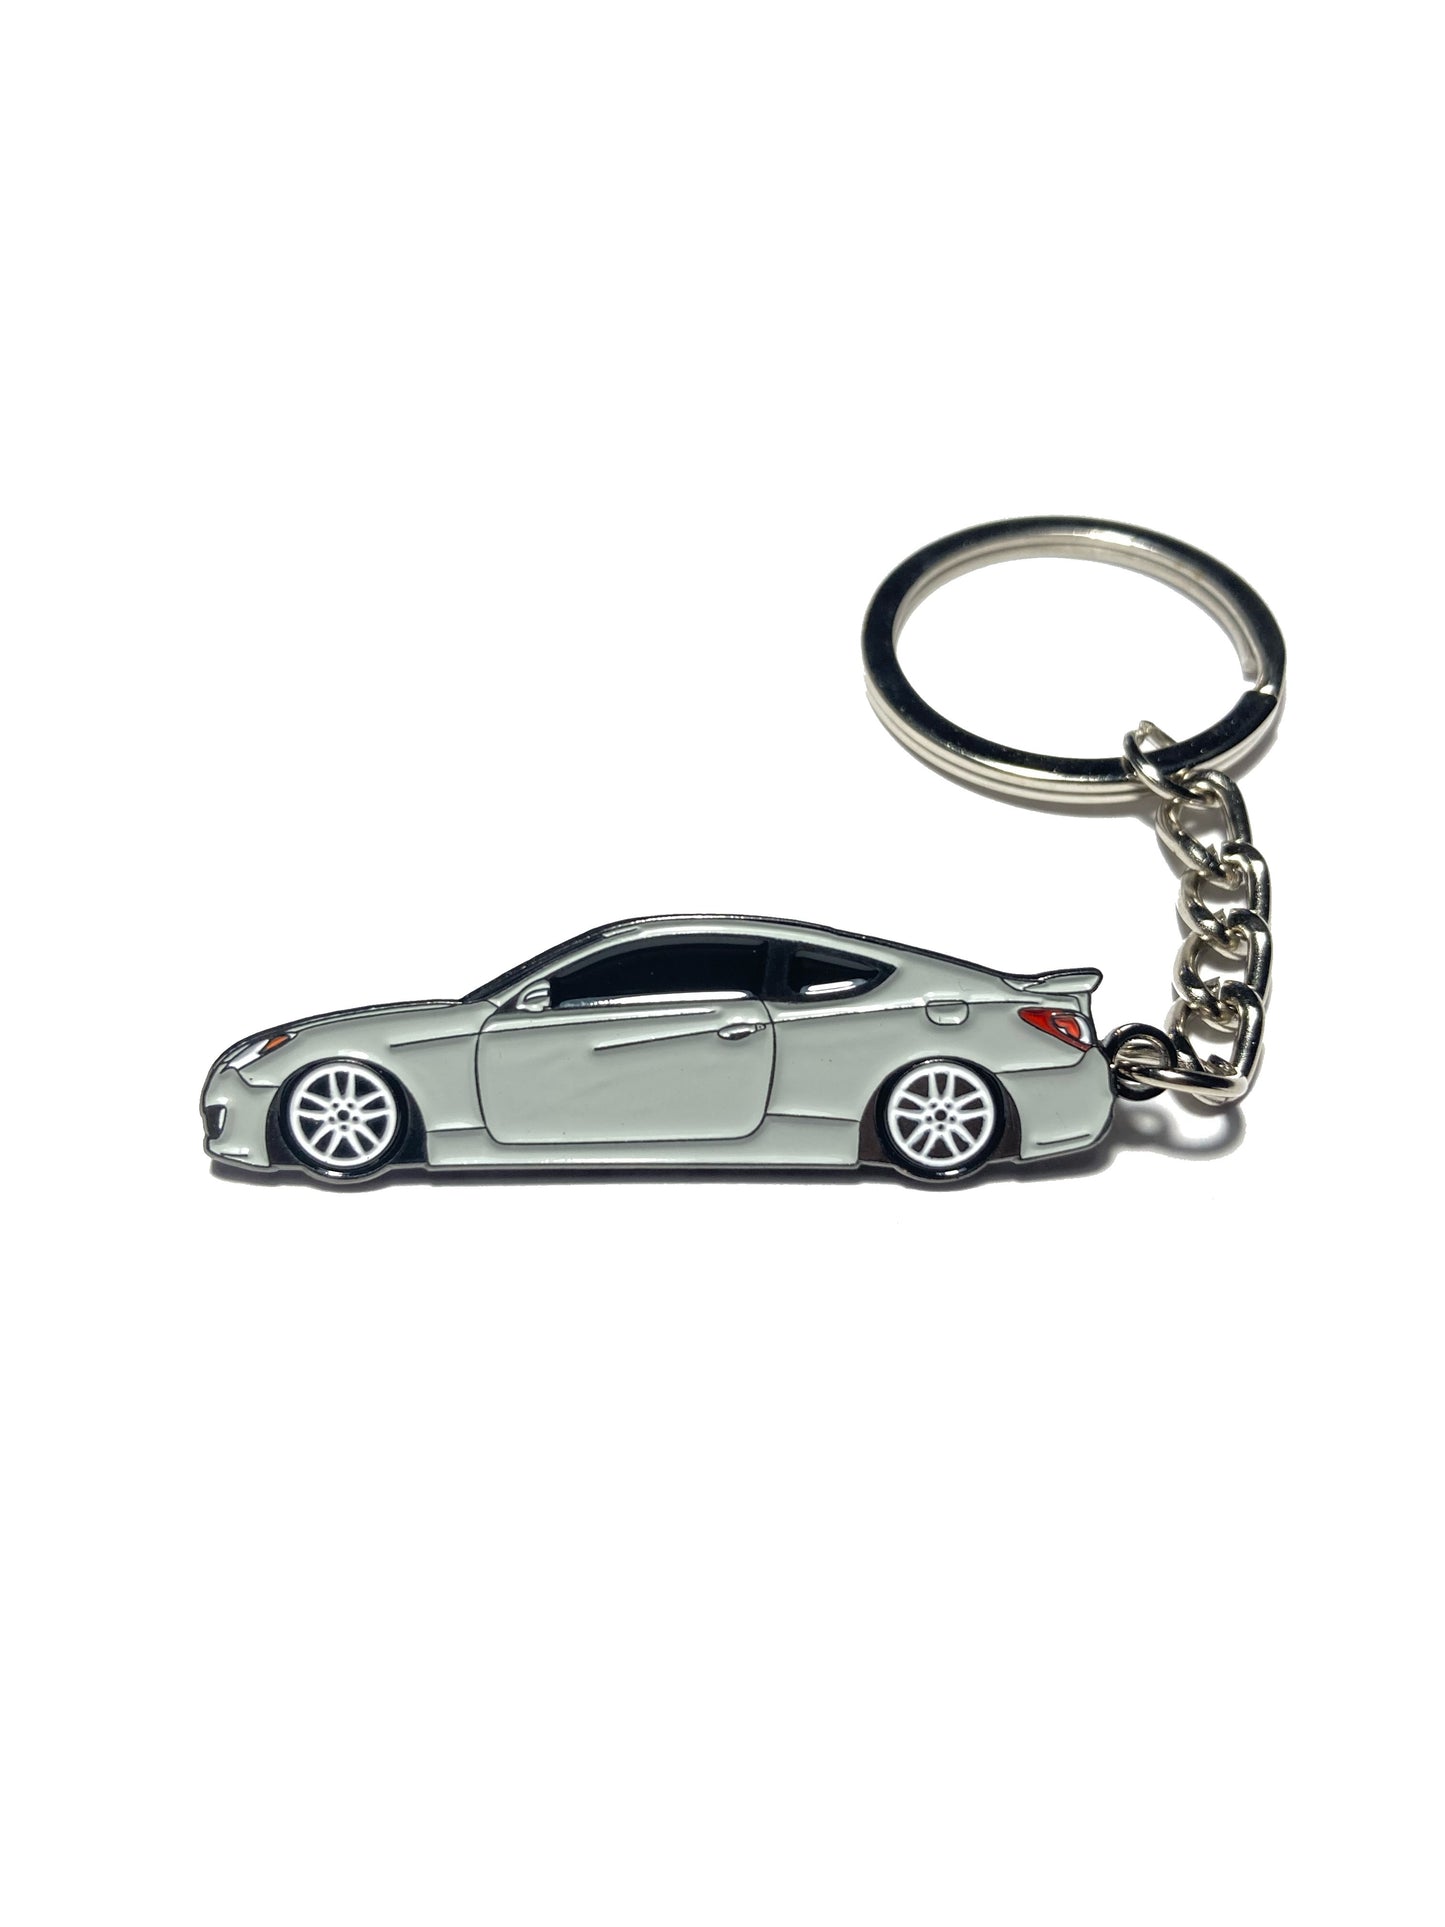 Genesis Coupe Keychains